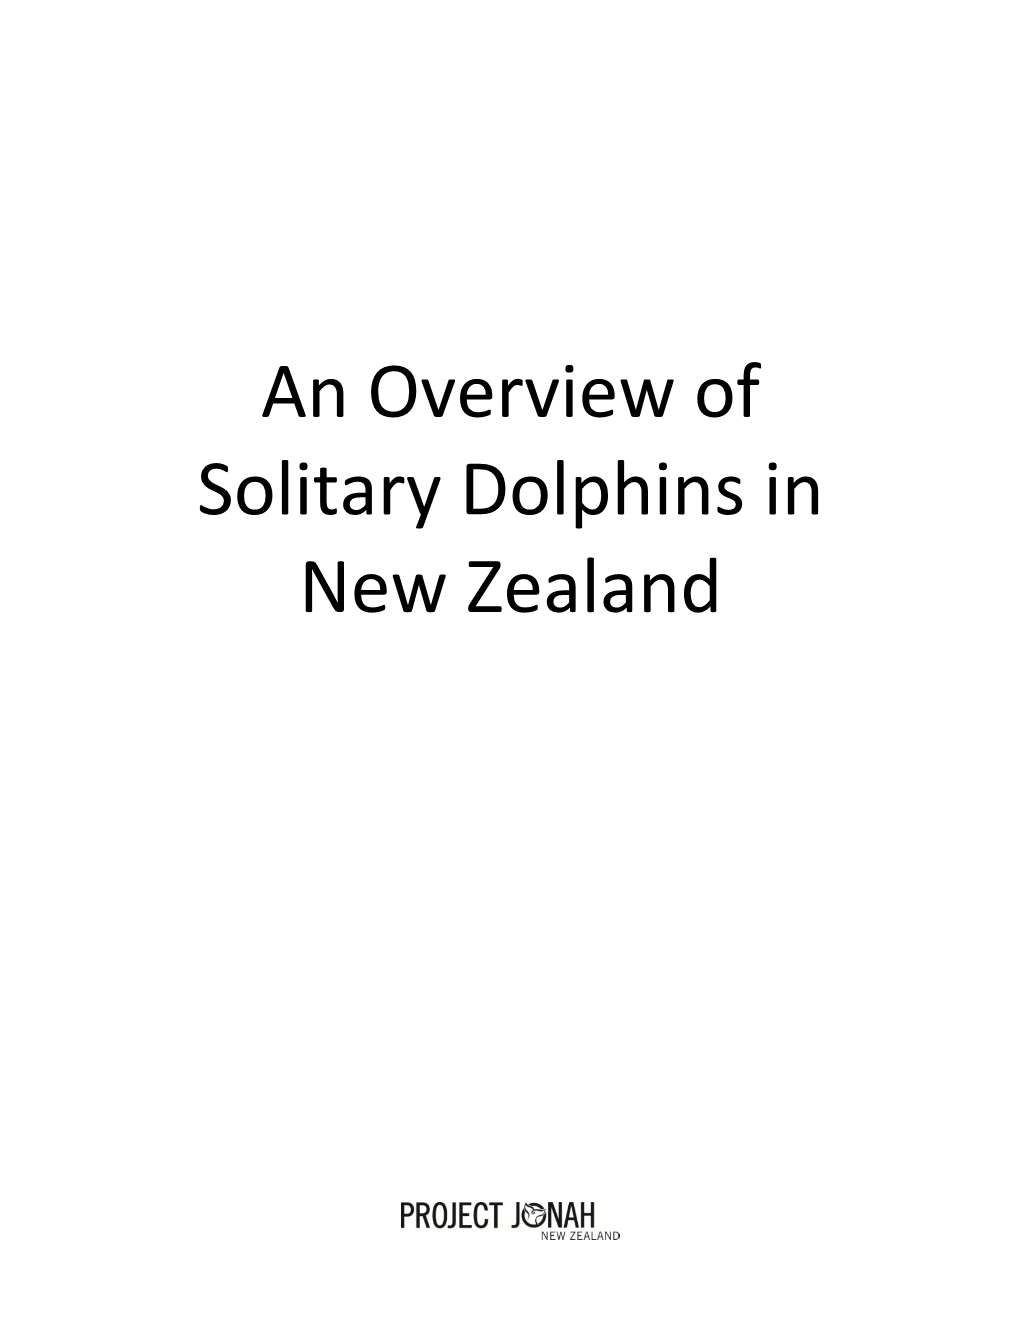 An Overview of Solitary Dolphins in New Zealand